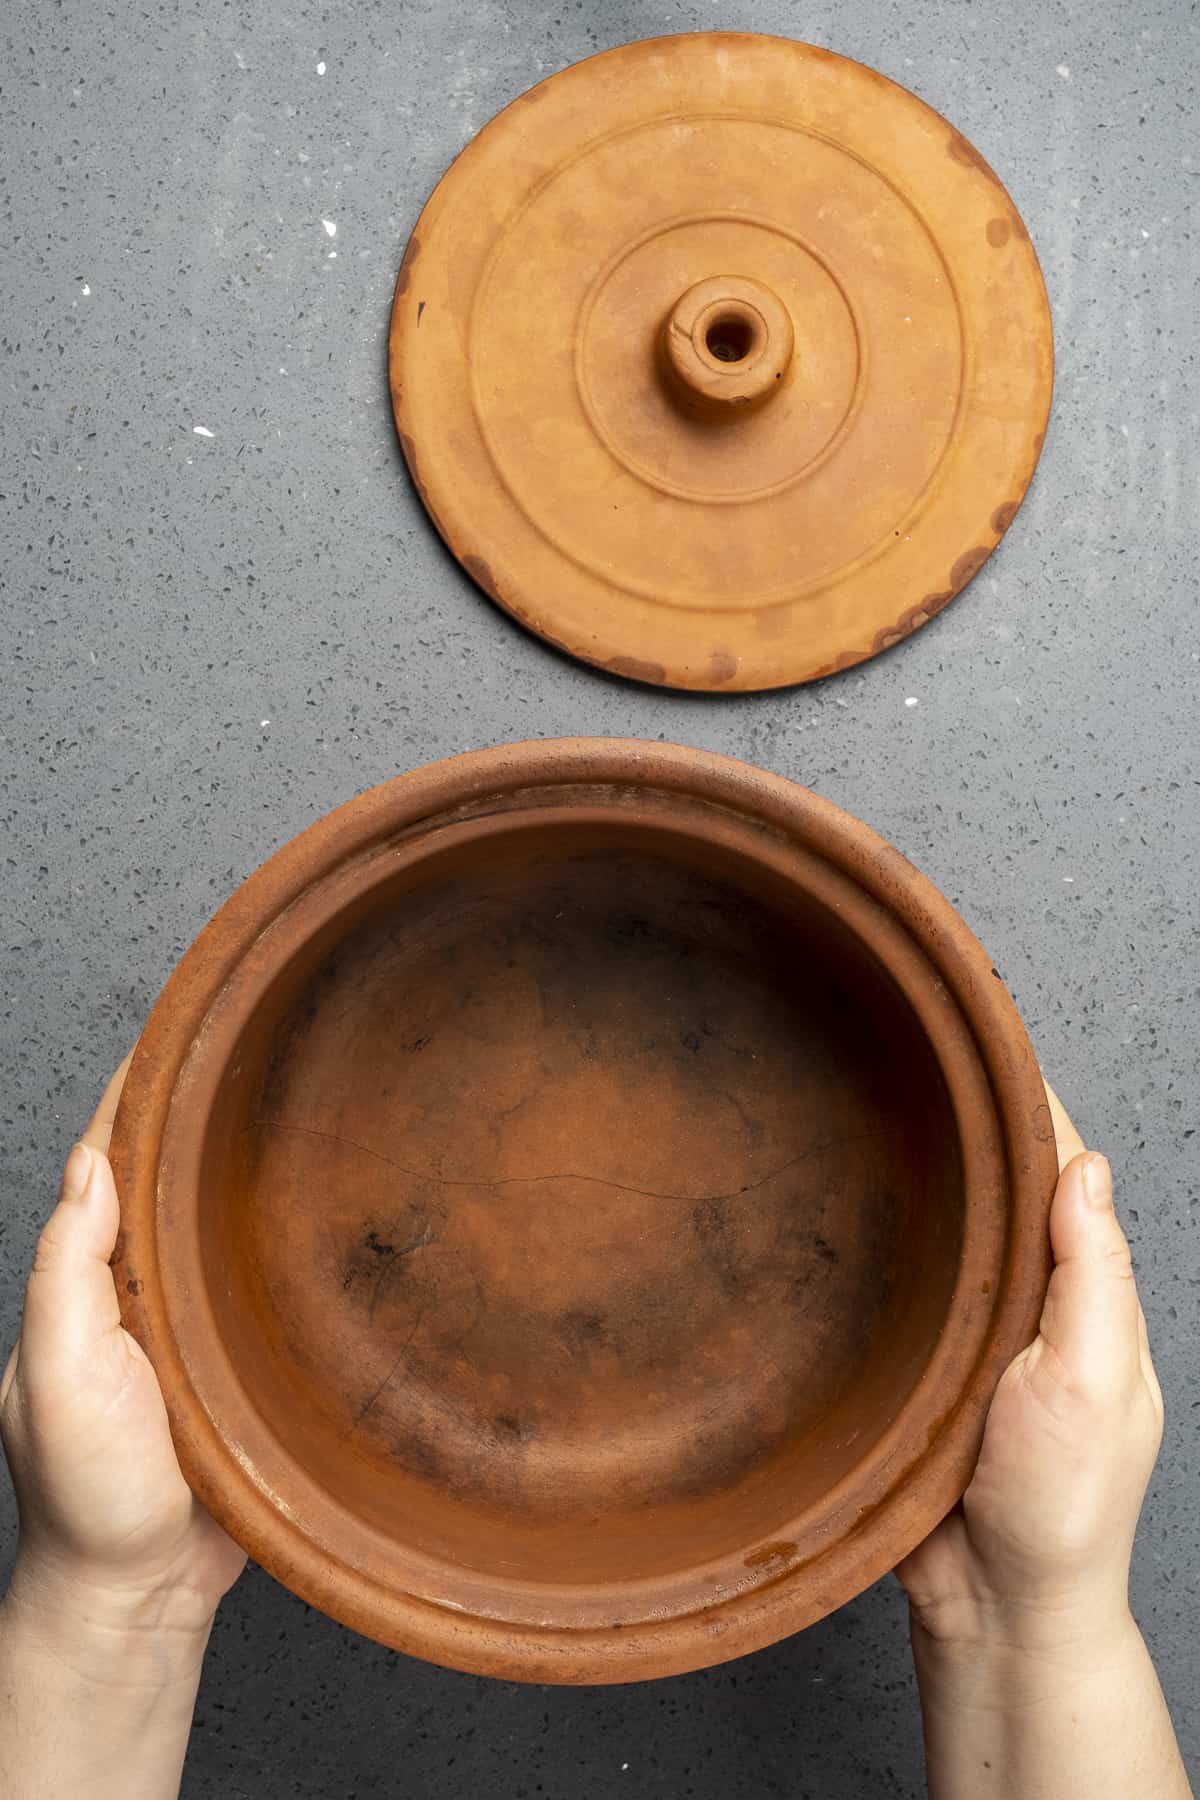 Hands holding a clay pot and a lid on the side.